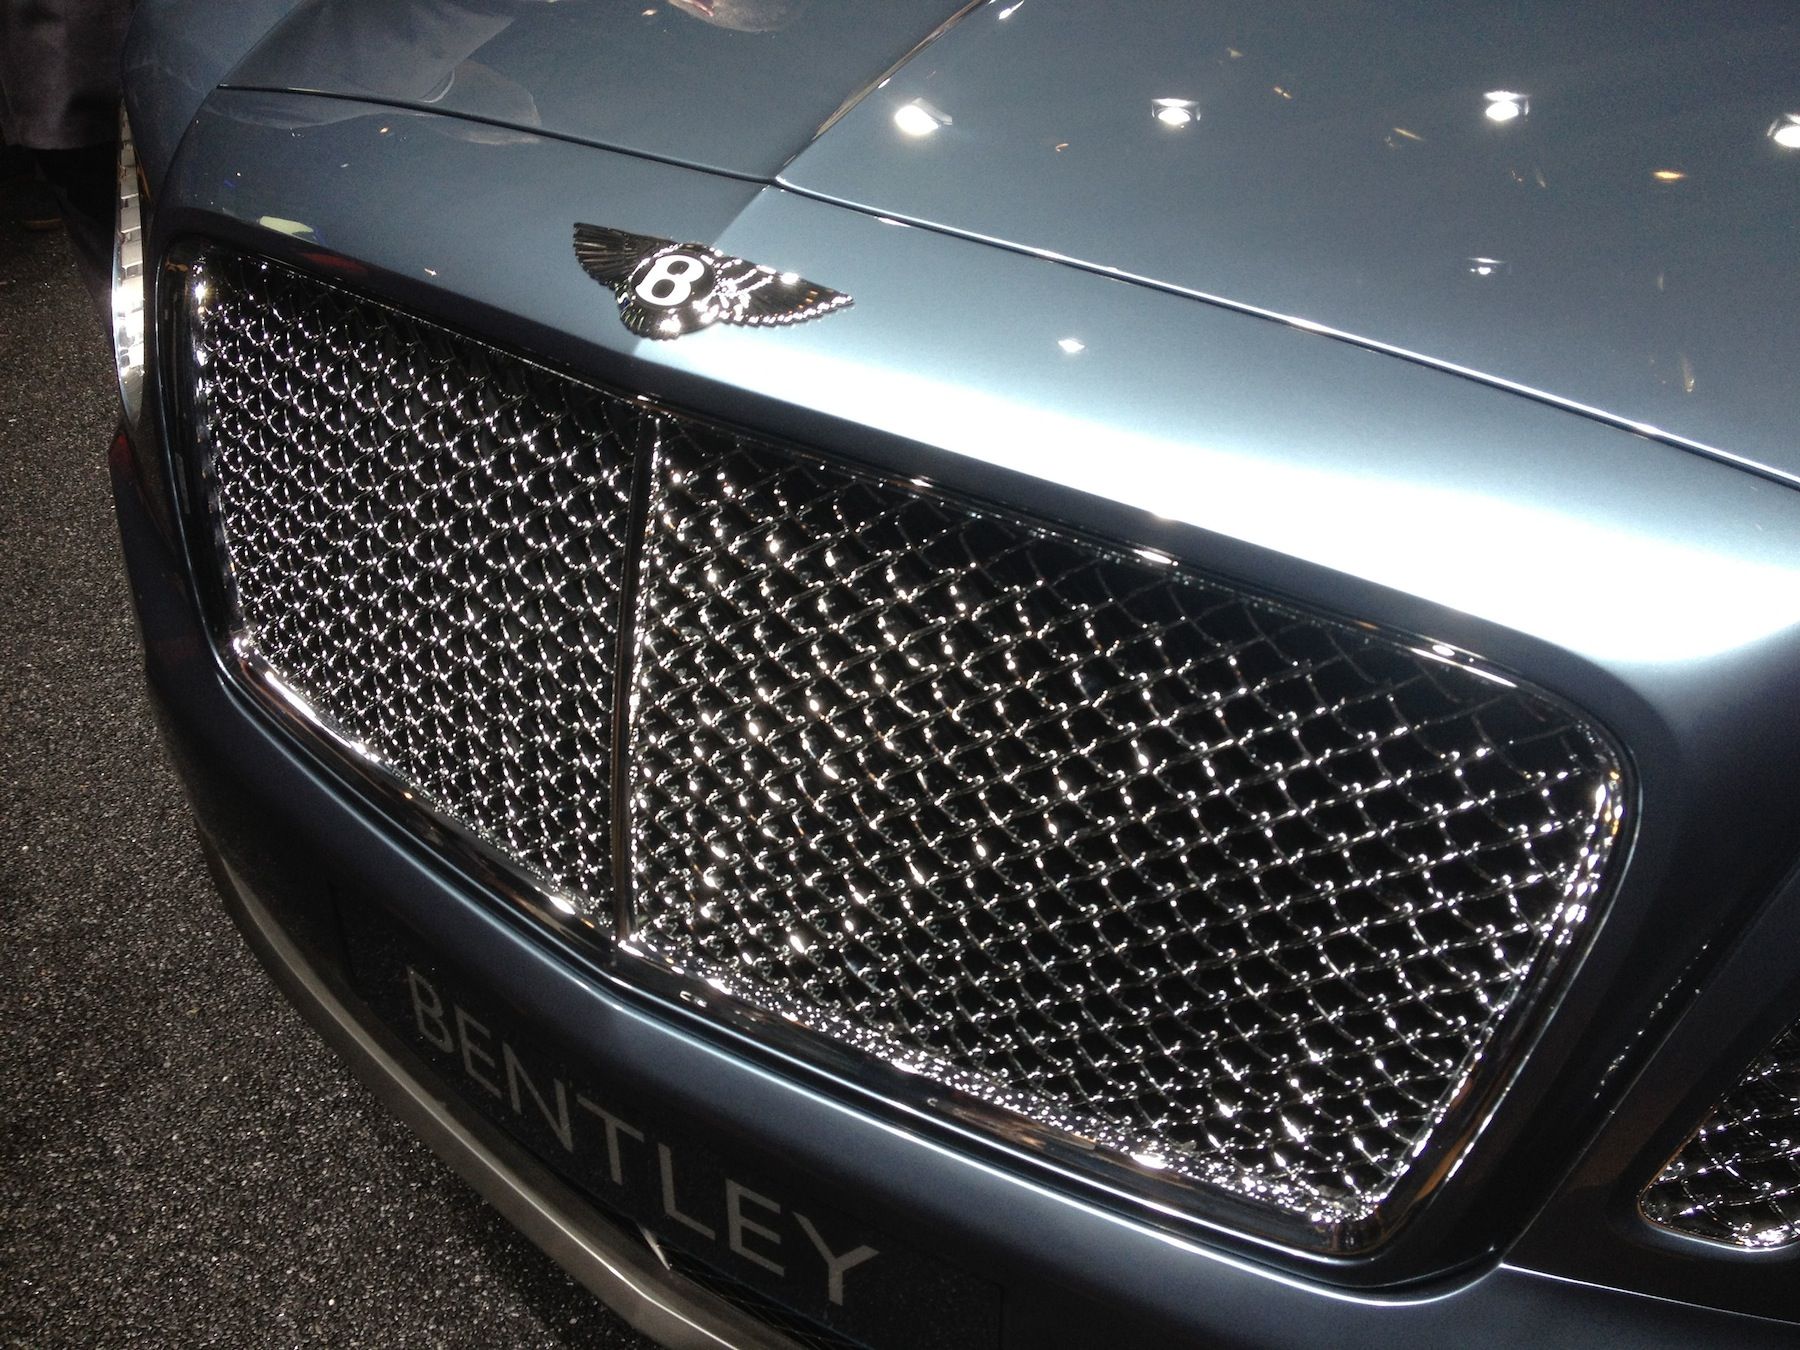 2012 Bentley EXP 9 F SUV Grill (View 10 of 10)